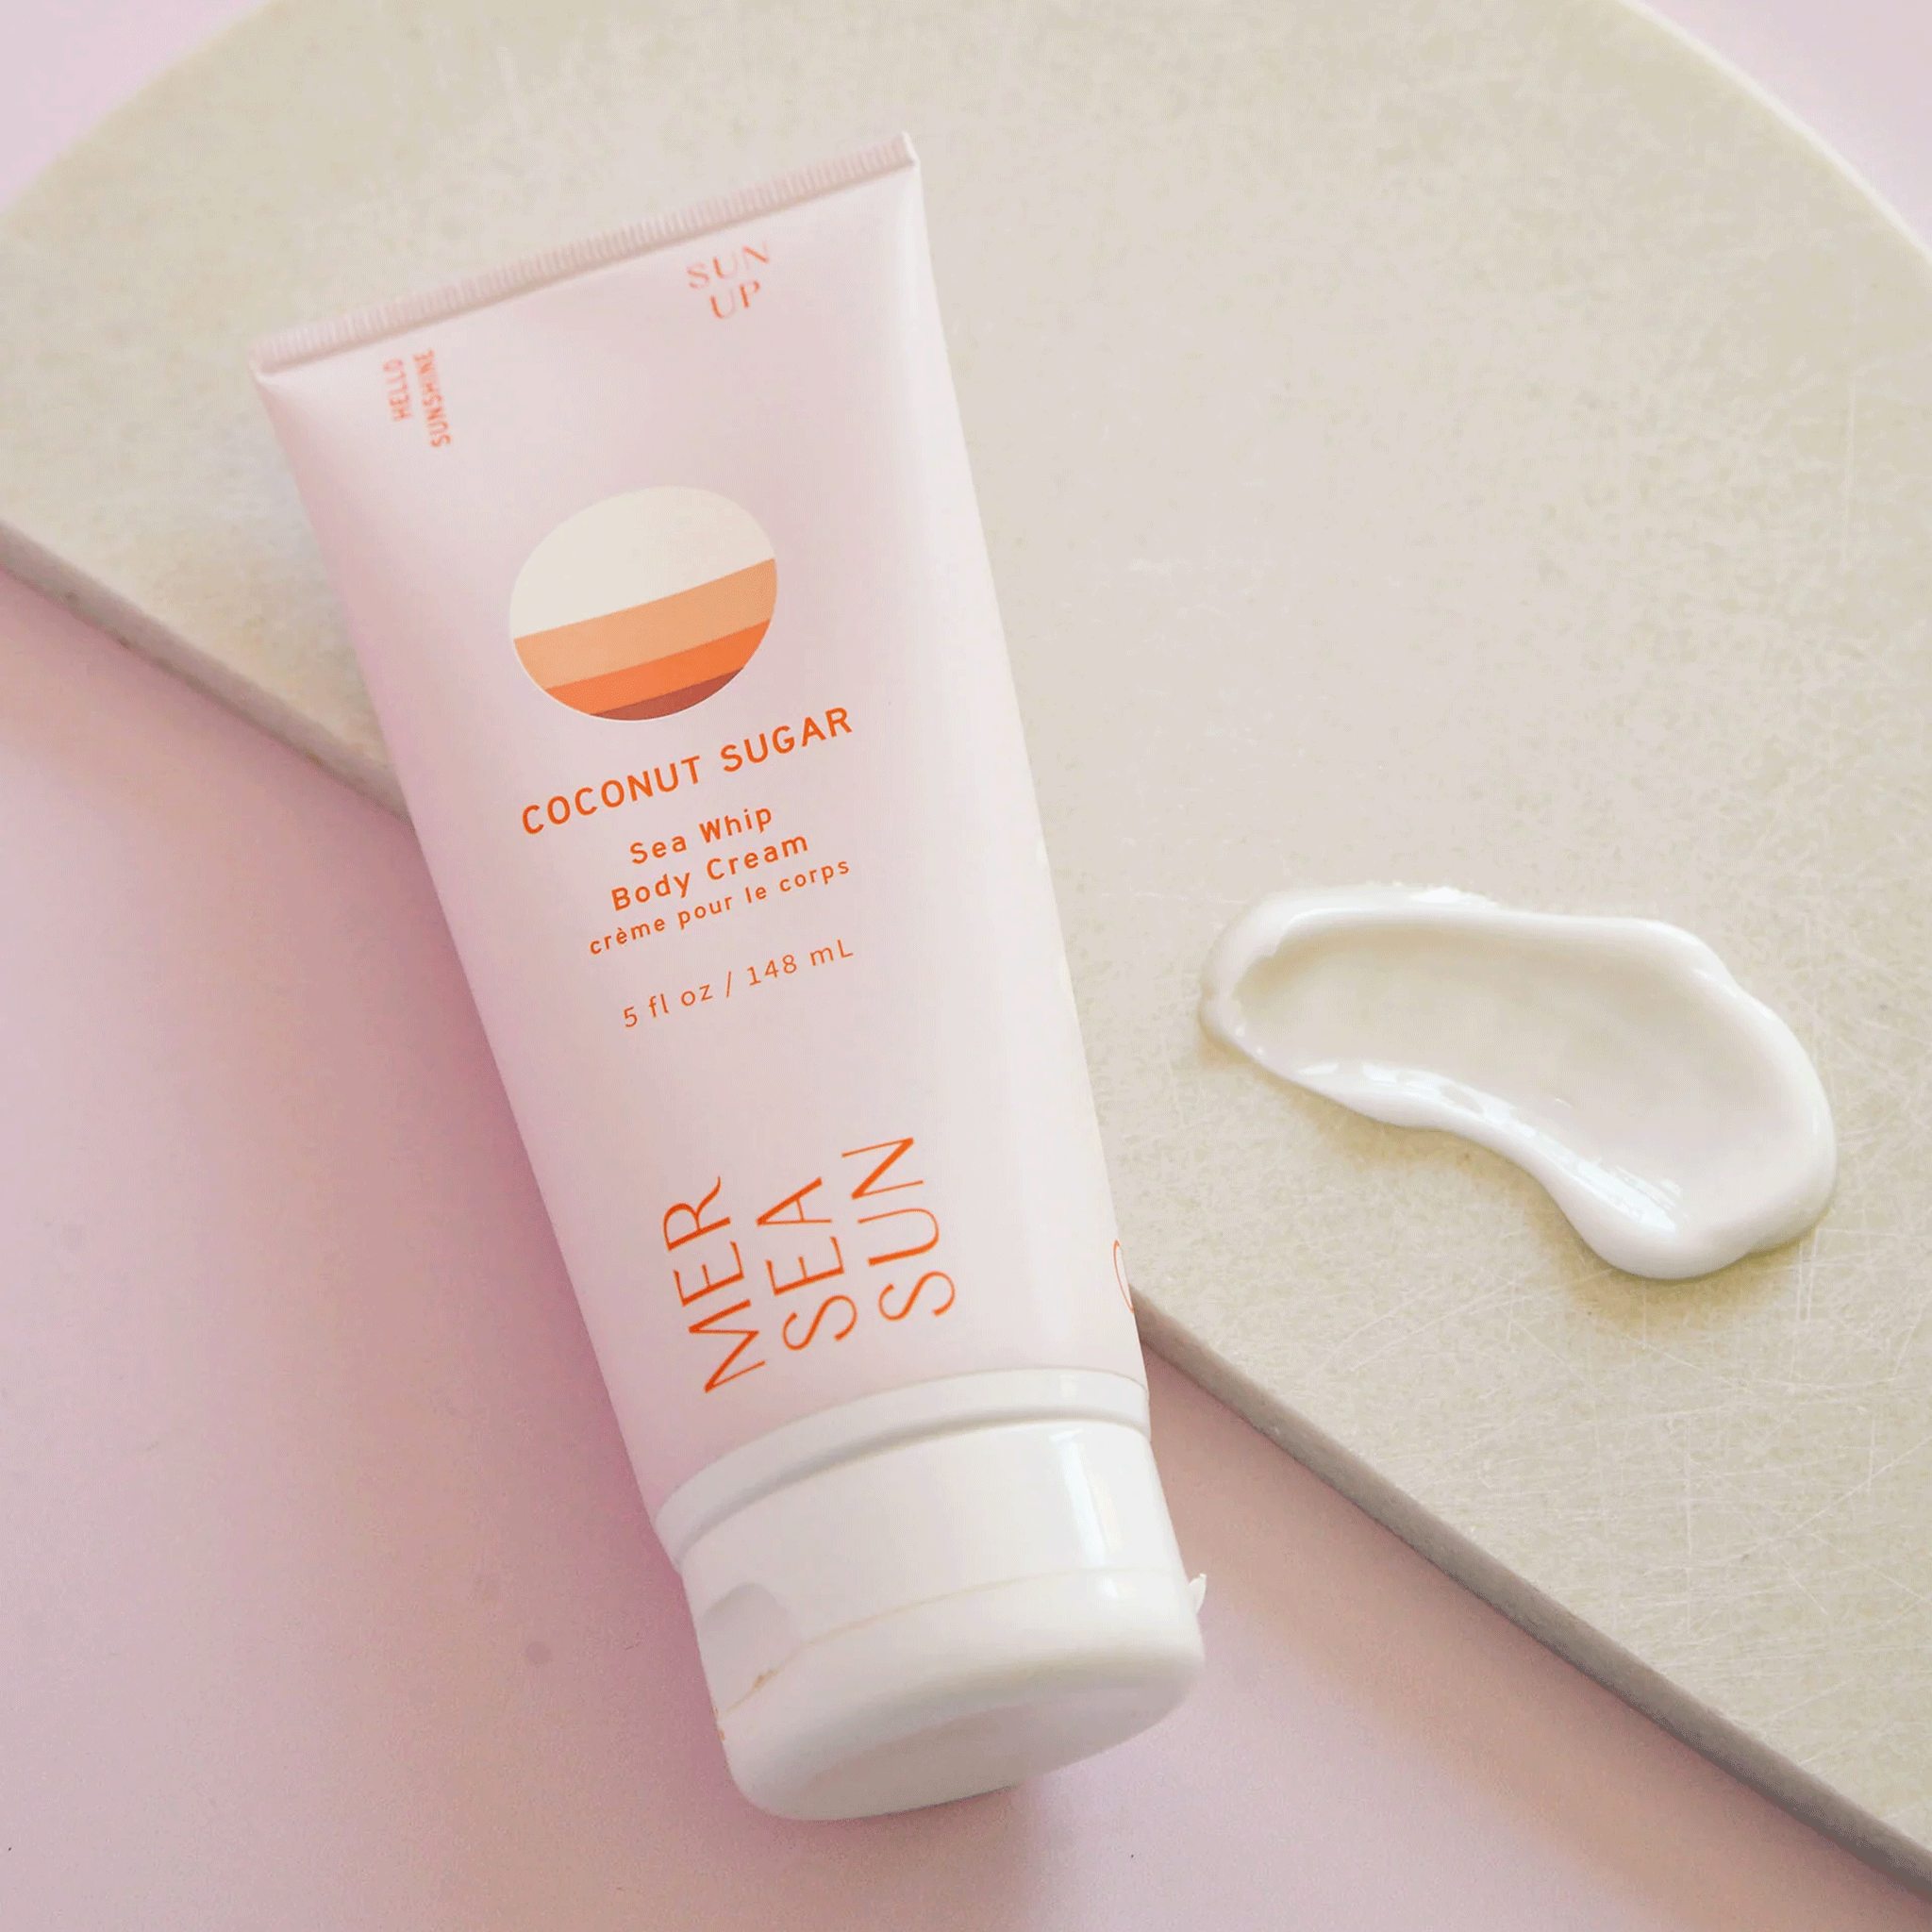 On a pink and white background is a light pink bottle of lotion with orange text on the front that reads, "Mersea Sun Coconut Sugar Sea Whip Body Cream". 